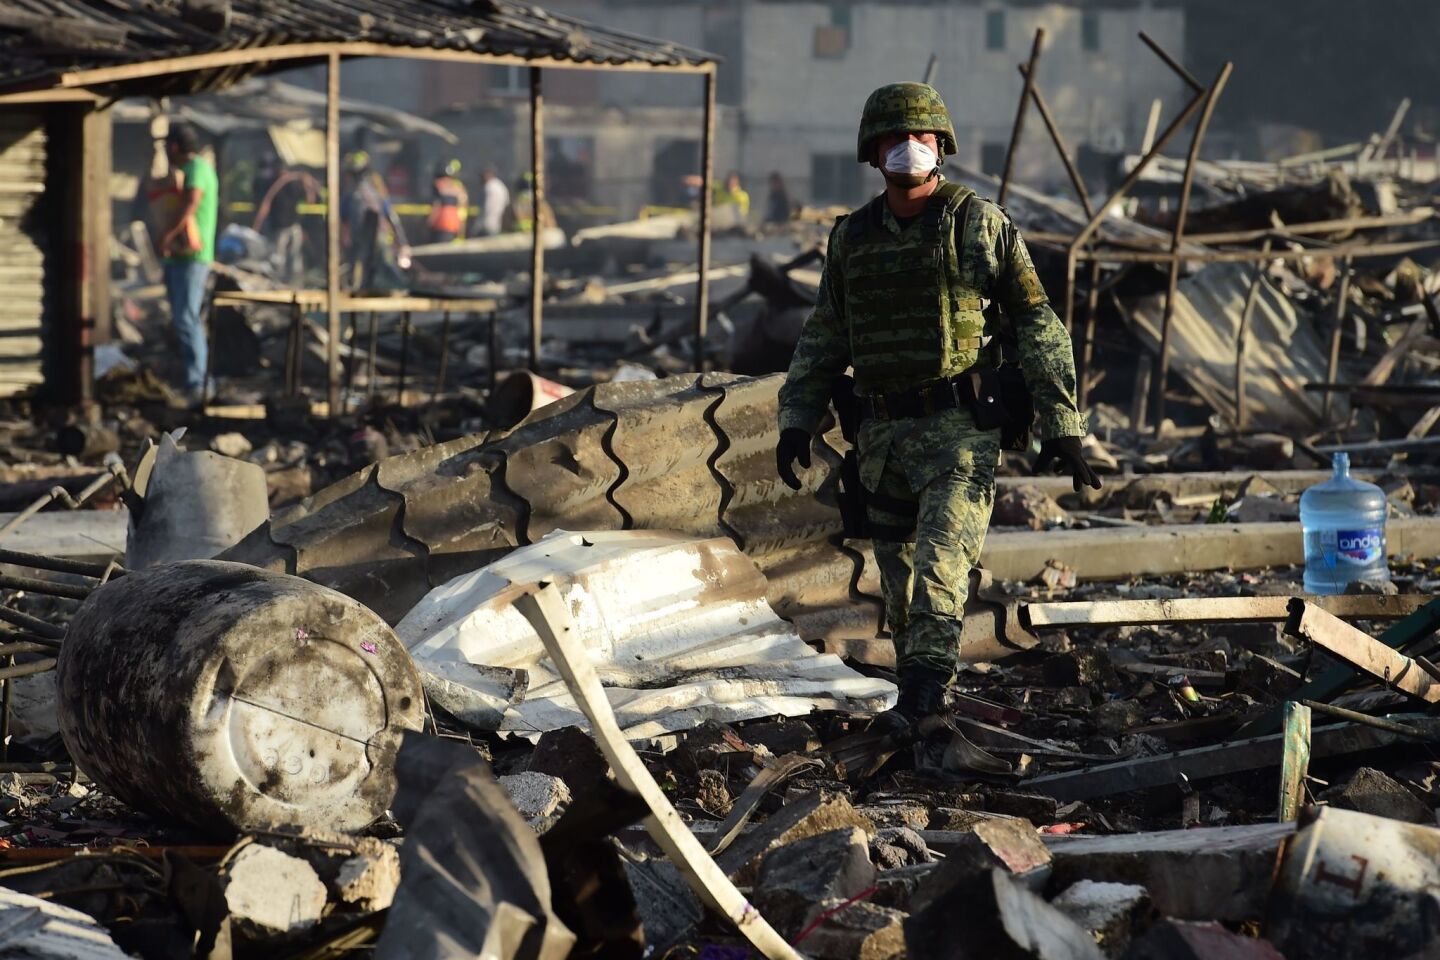 Soldiers search amid the debris left by deadly blasts at a fireworks market north of Mexico City.